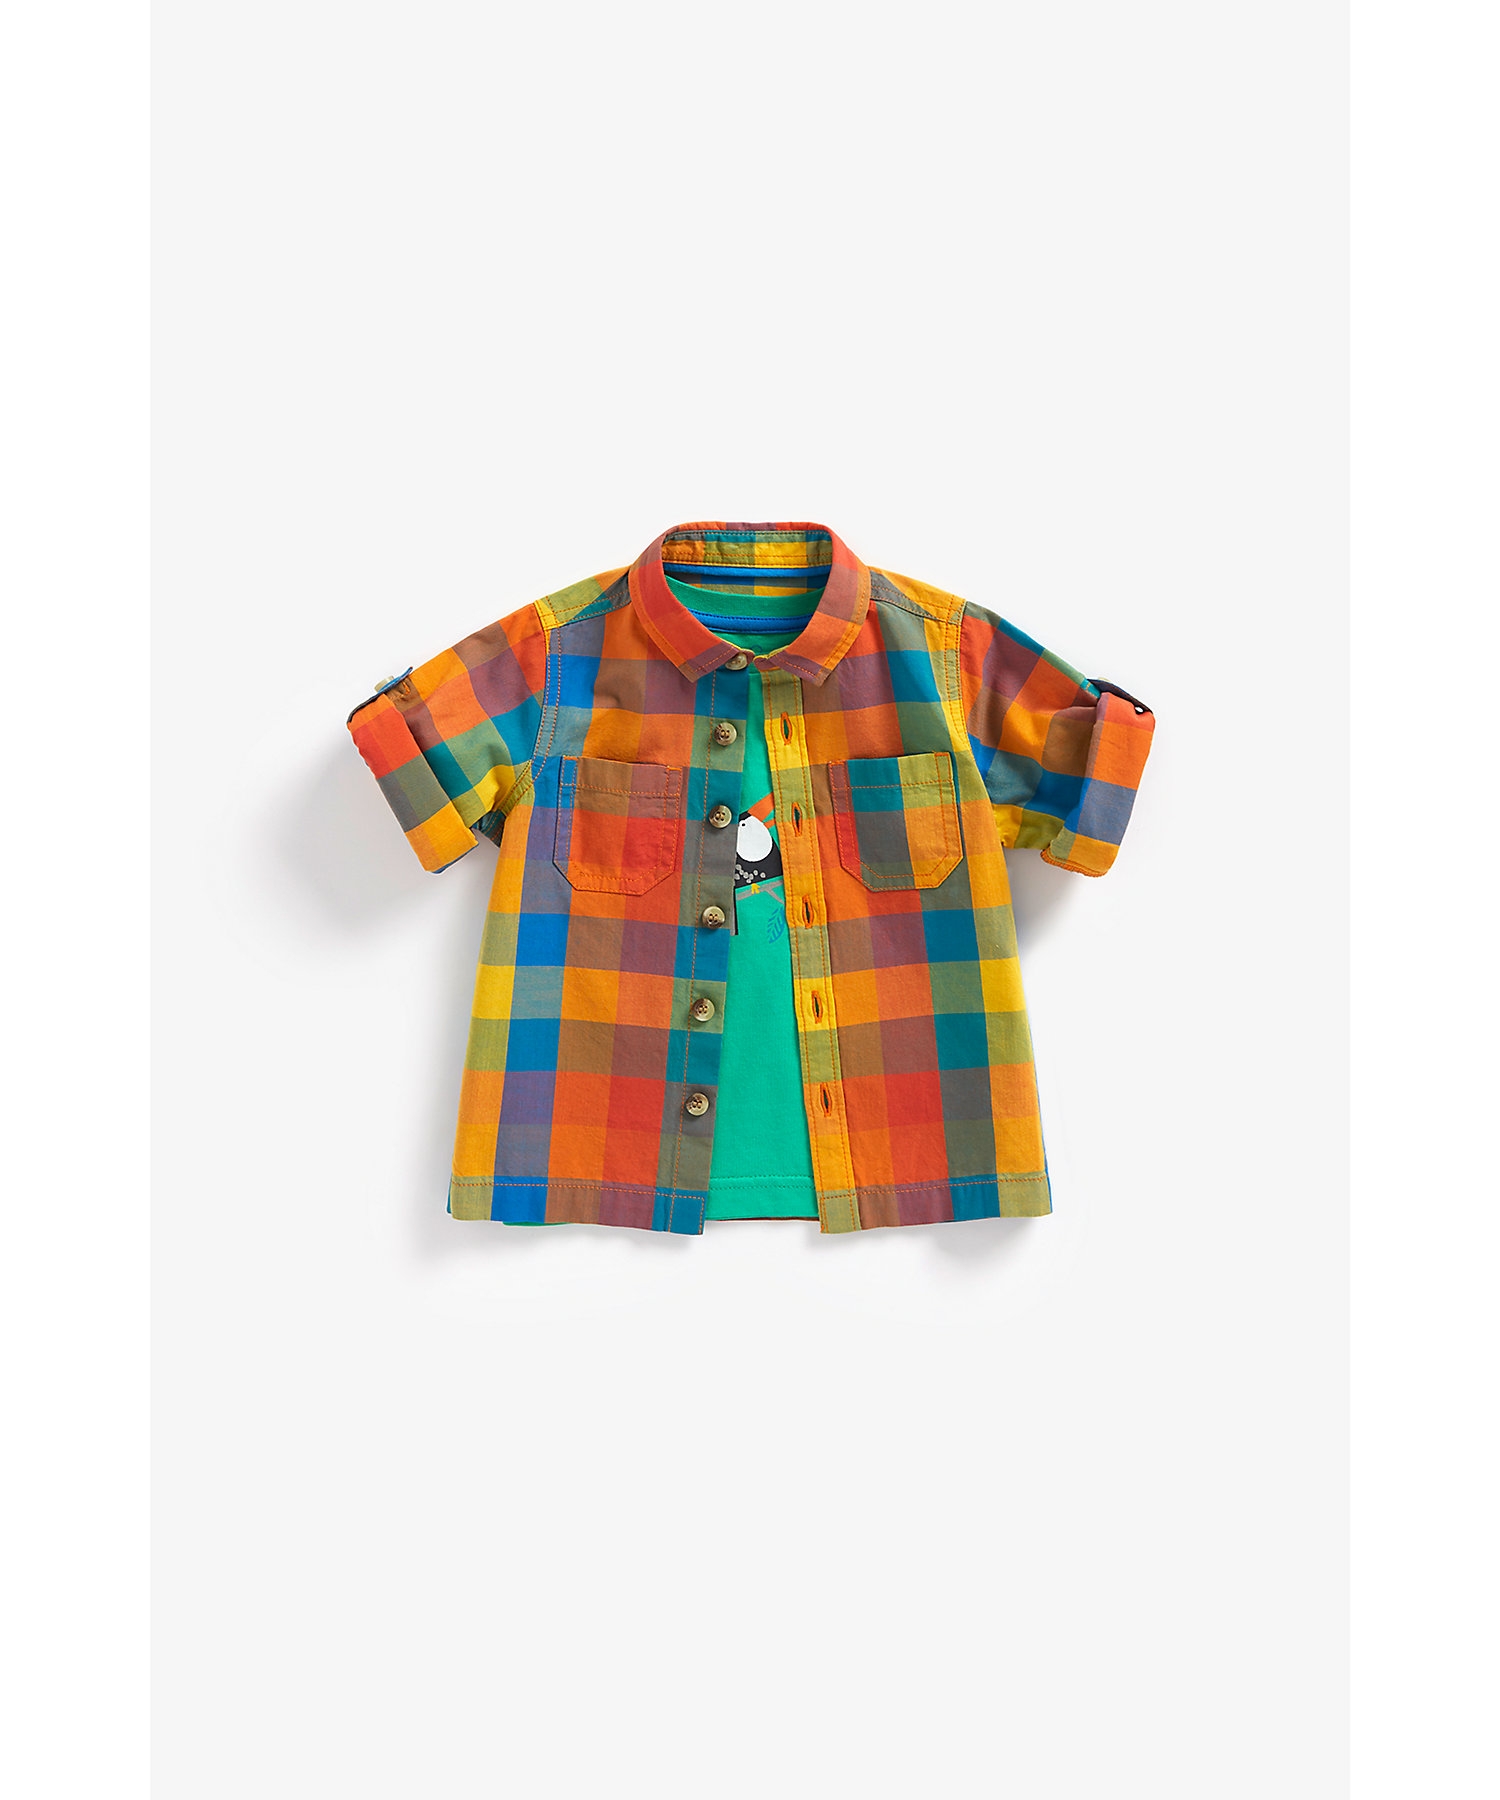 Boys Half Sleeves Shirt with T Shirt Checked-Multicolor